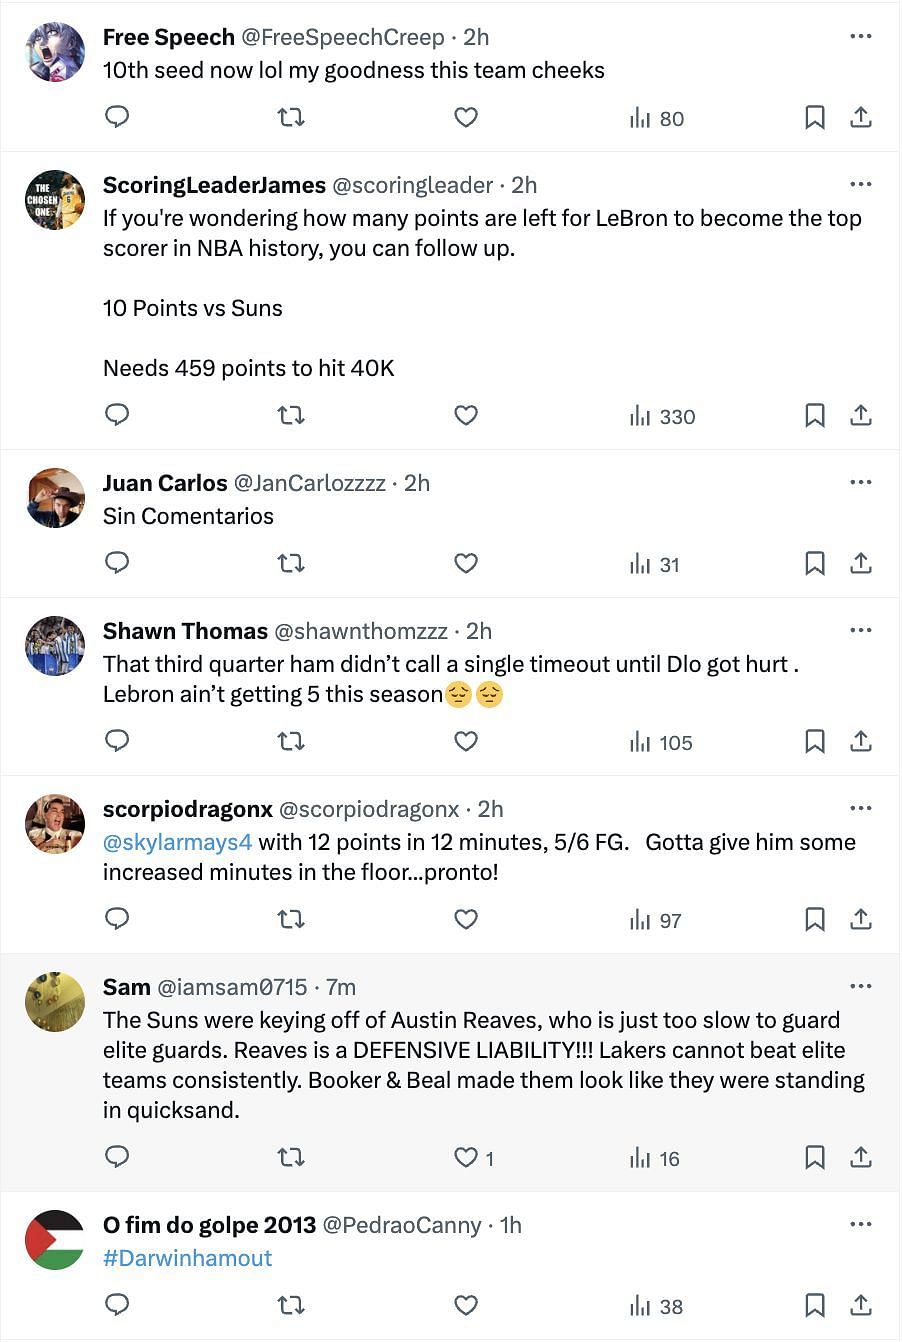 Fans hammered the Lakers following their loss to the Suns